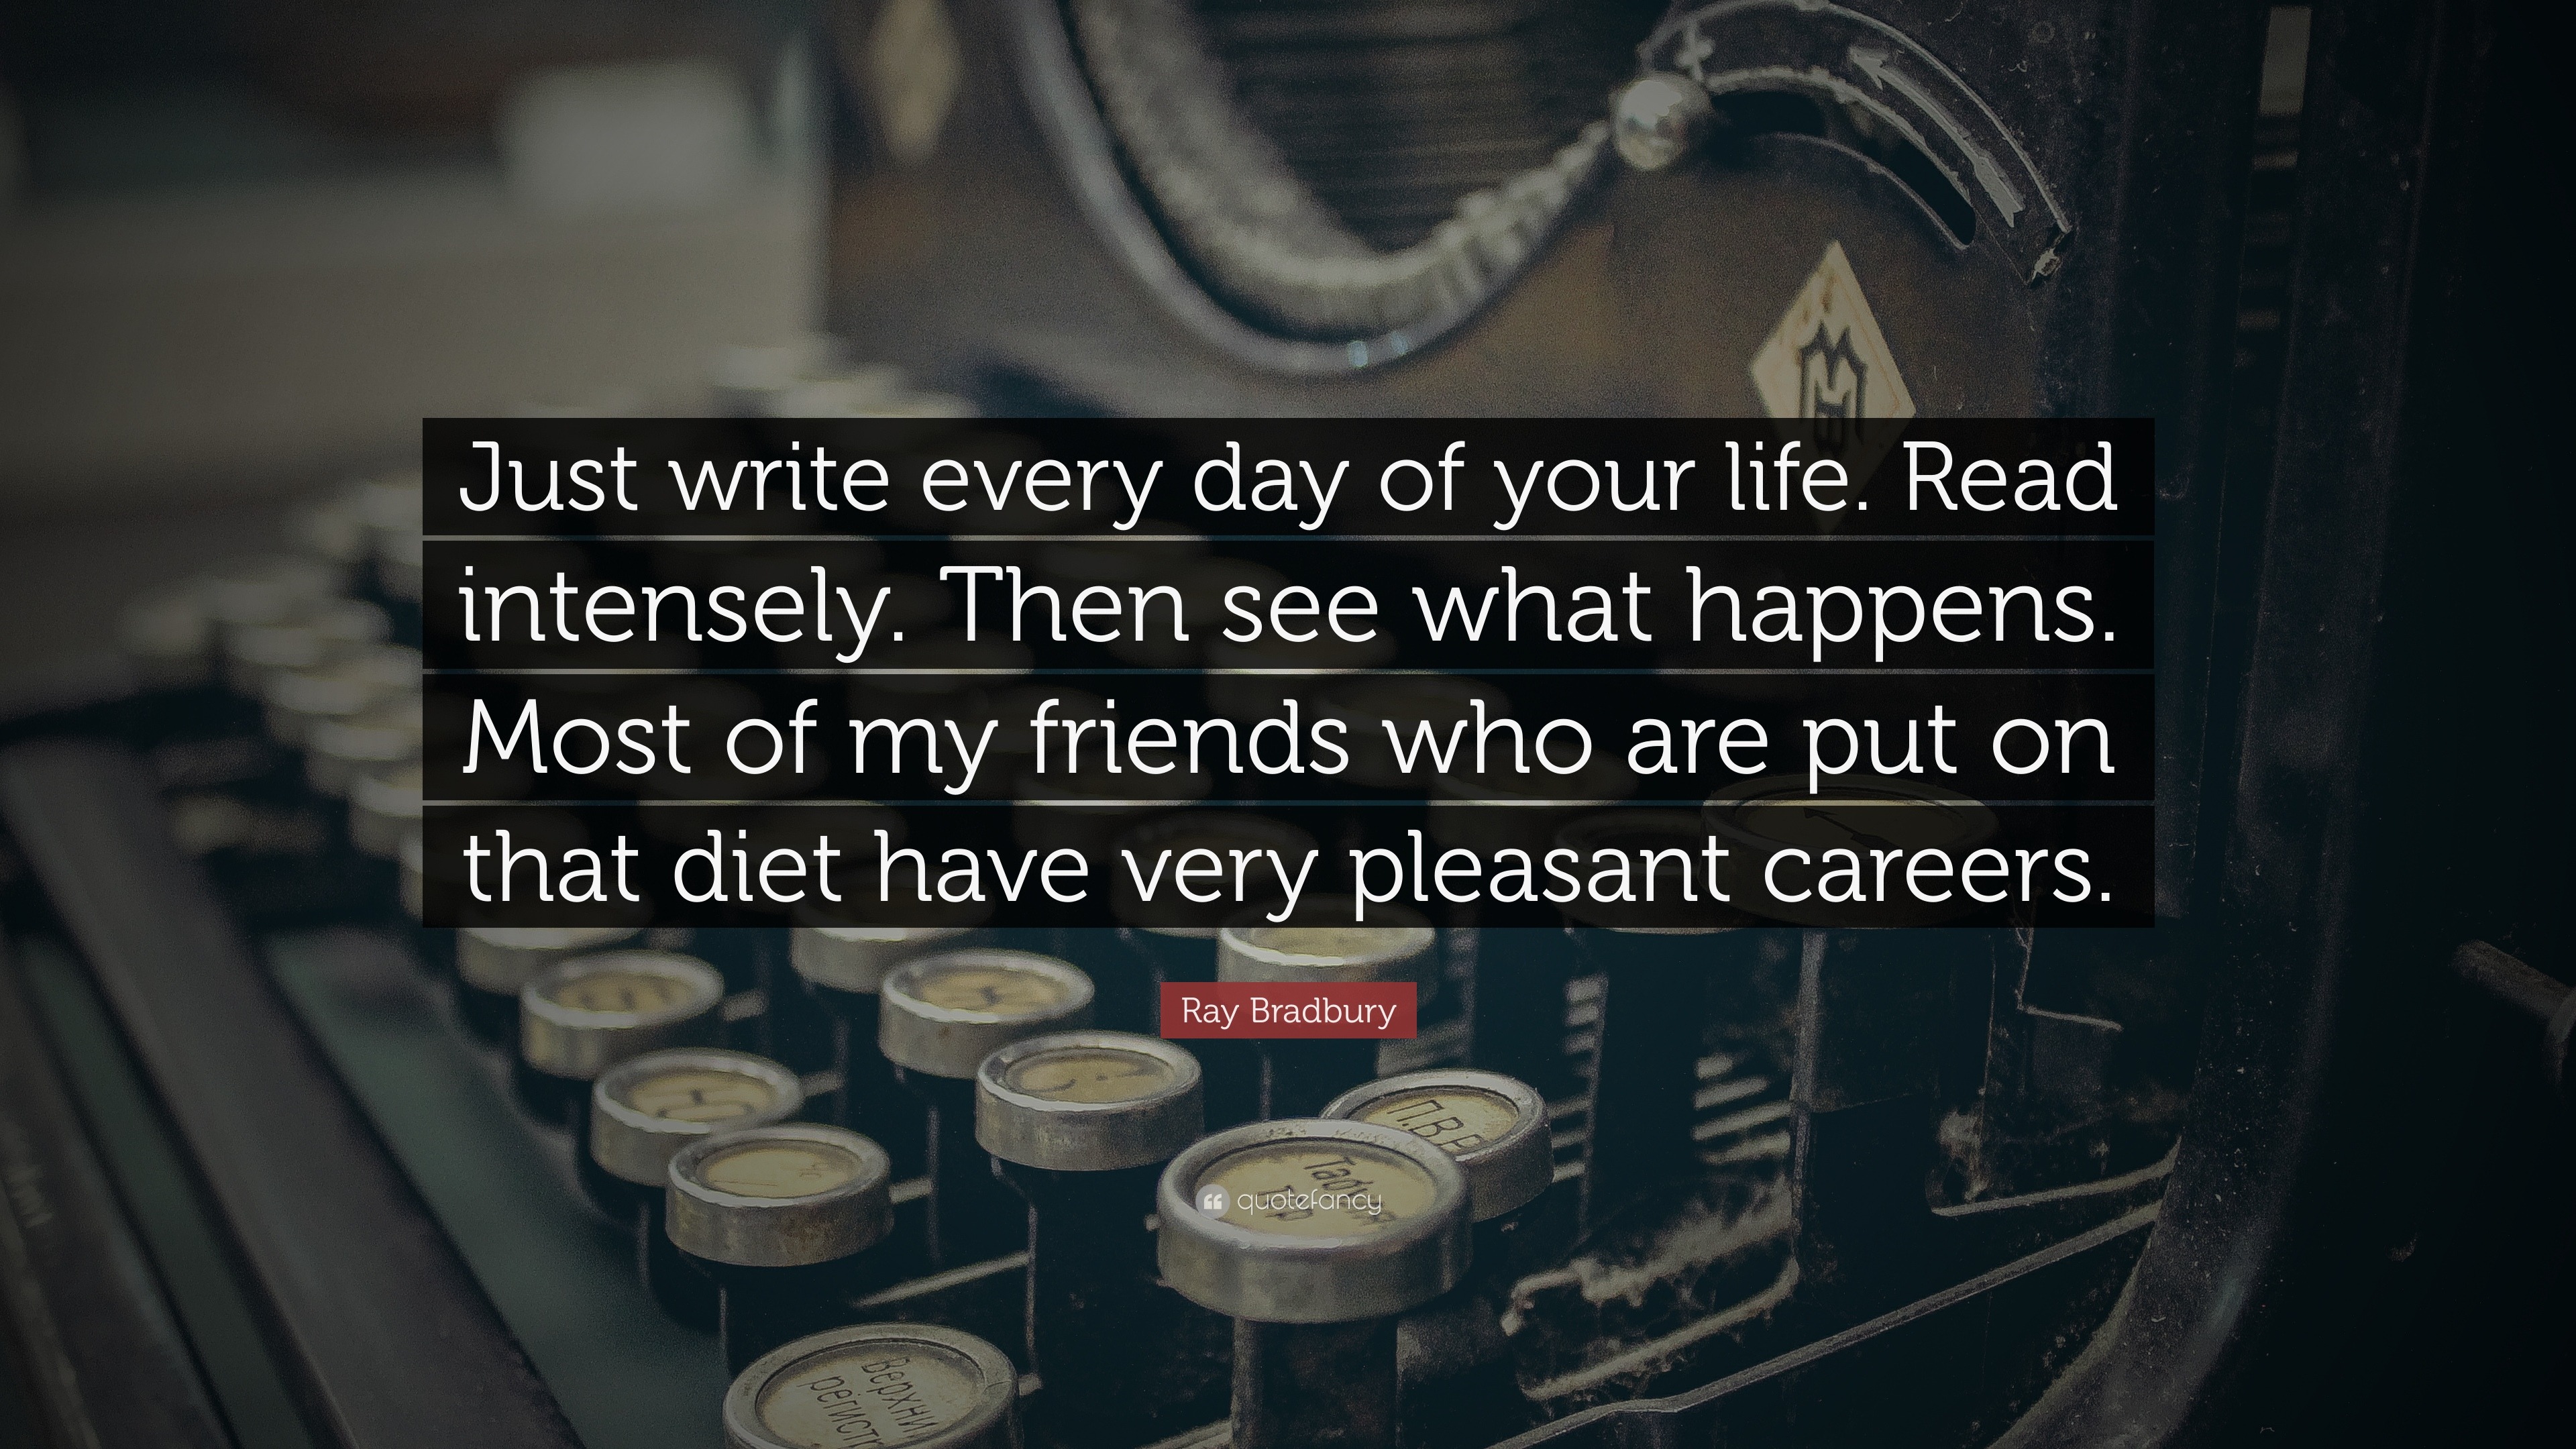 Ray Bradbury Quote: “Just write every day of your life. Read